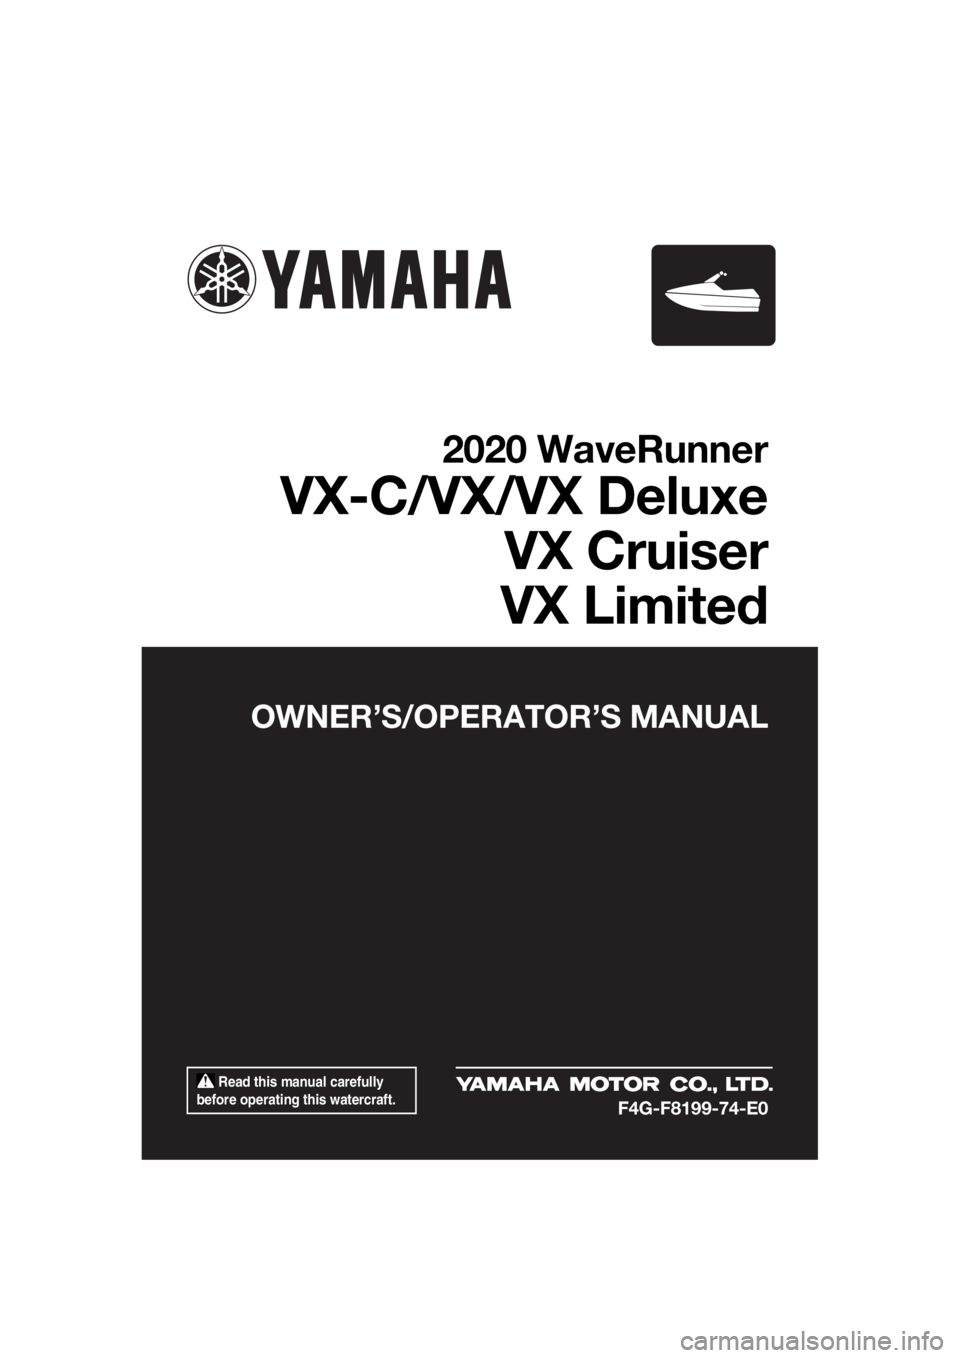 YAMAHA VX-C 2020  Owners Manual  Read this manual carefully 
before operating this watercraft.
OWNER’S/OPERATOR’S MANUAL
2020 WaveRunner
VX-C/VX/VX Deluxe
VX Cruiser
VX Limited
F4G-F8199-74-E0
UF4G74E0.book  Page 1  Tuesday, Jul